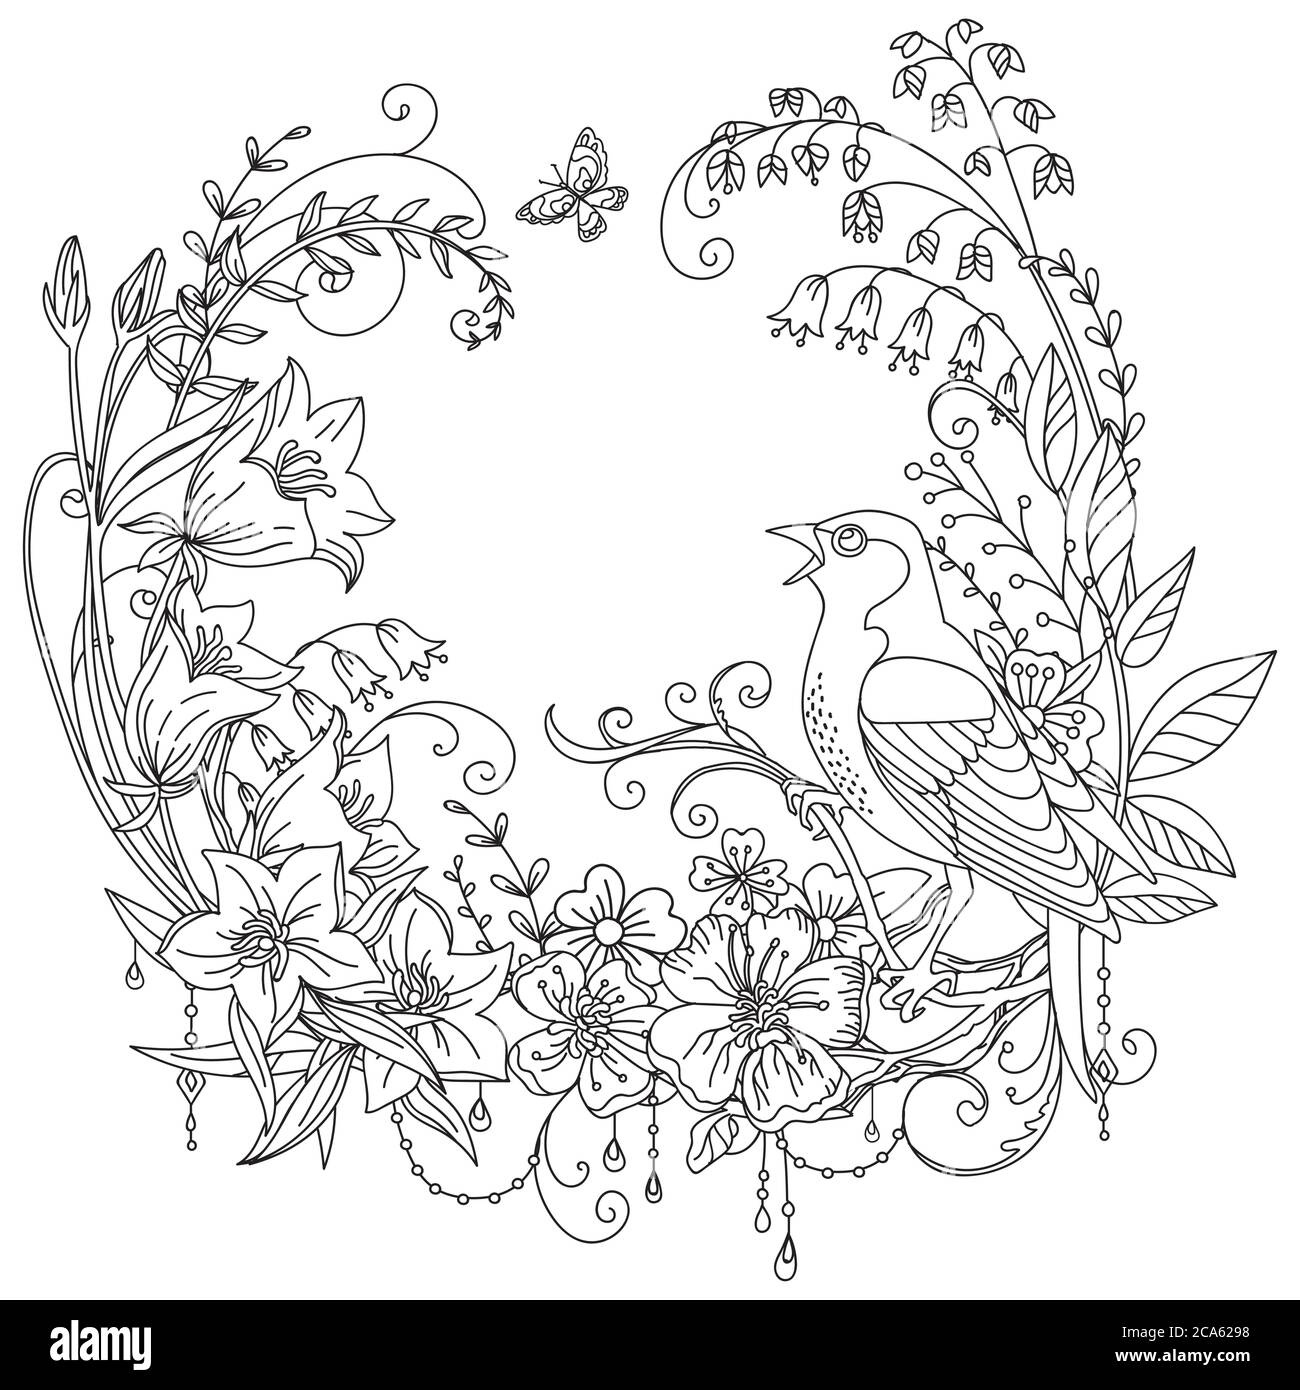 Vector coloring ornamental wreth with bird and meadow flowers in circle composition. Decorative illustration black contour drawing isolated on white. Stock Vector